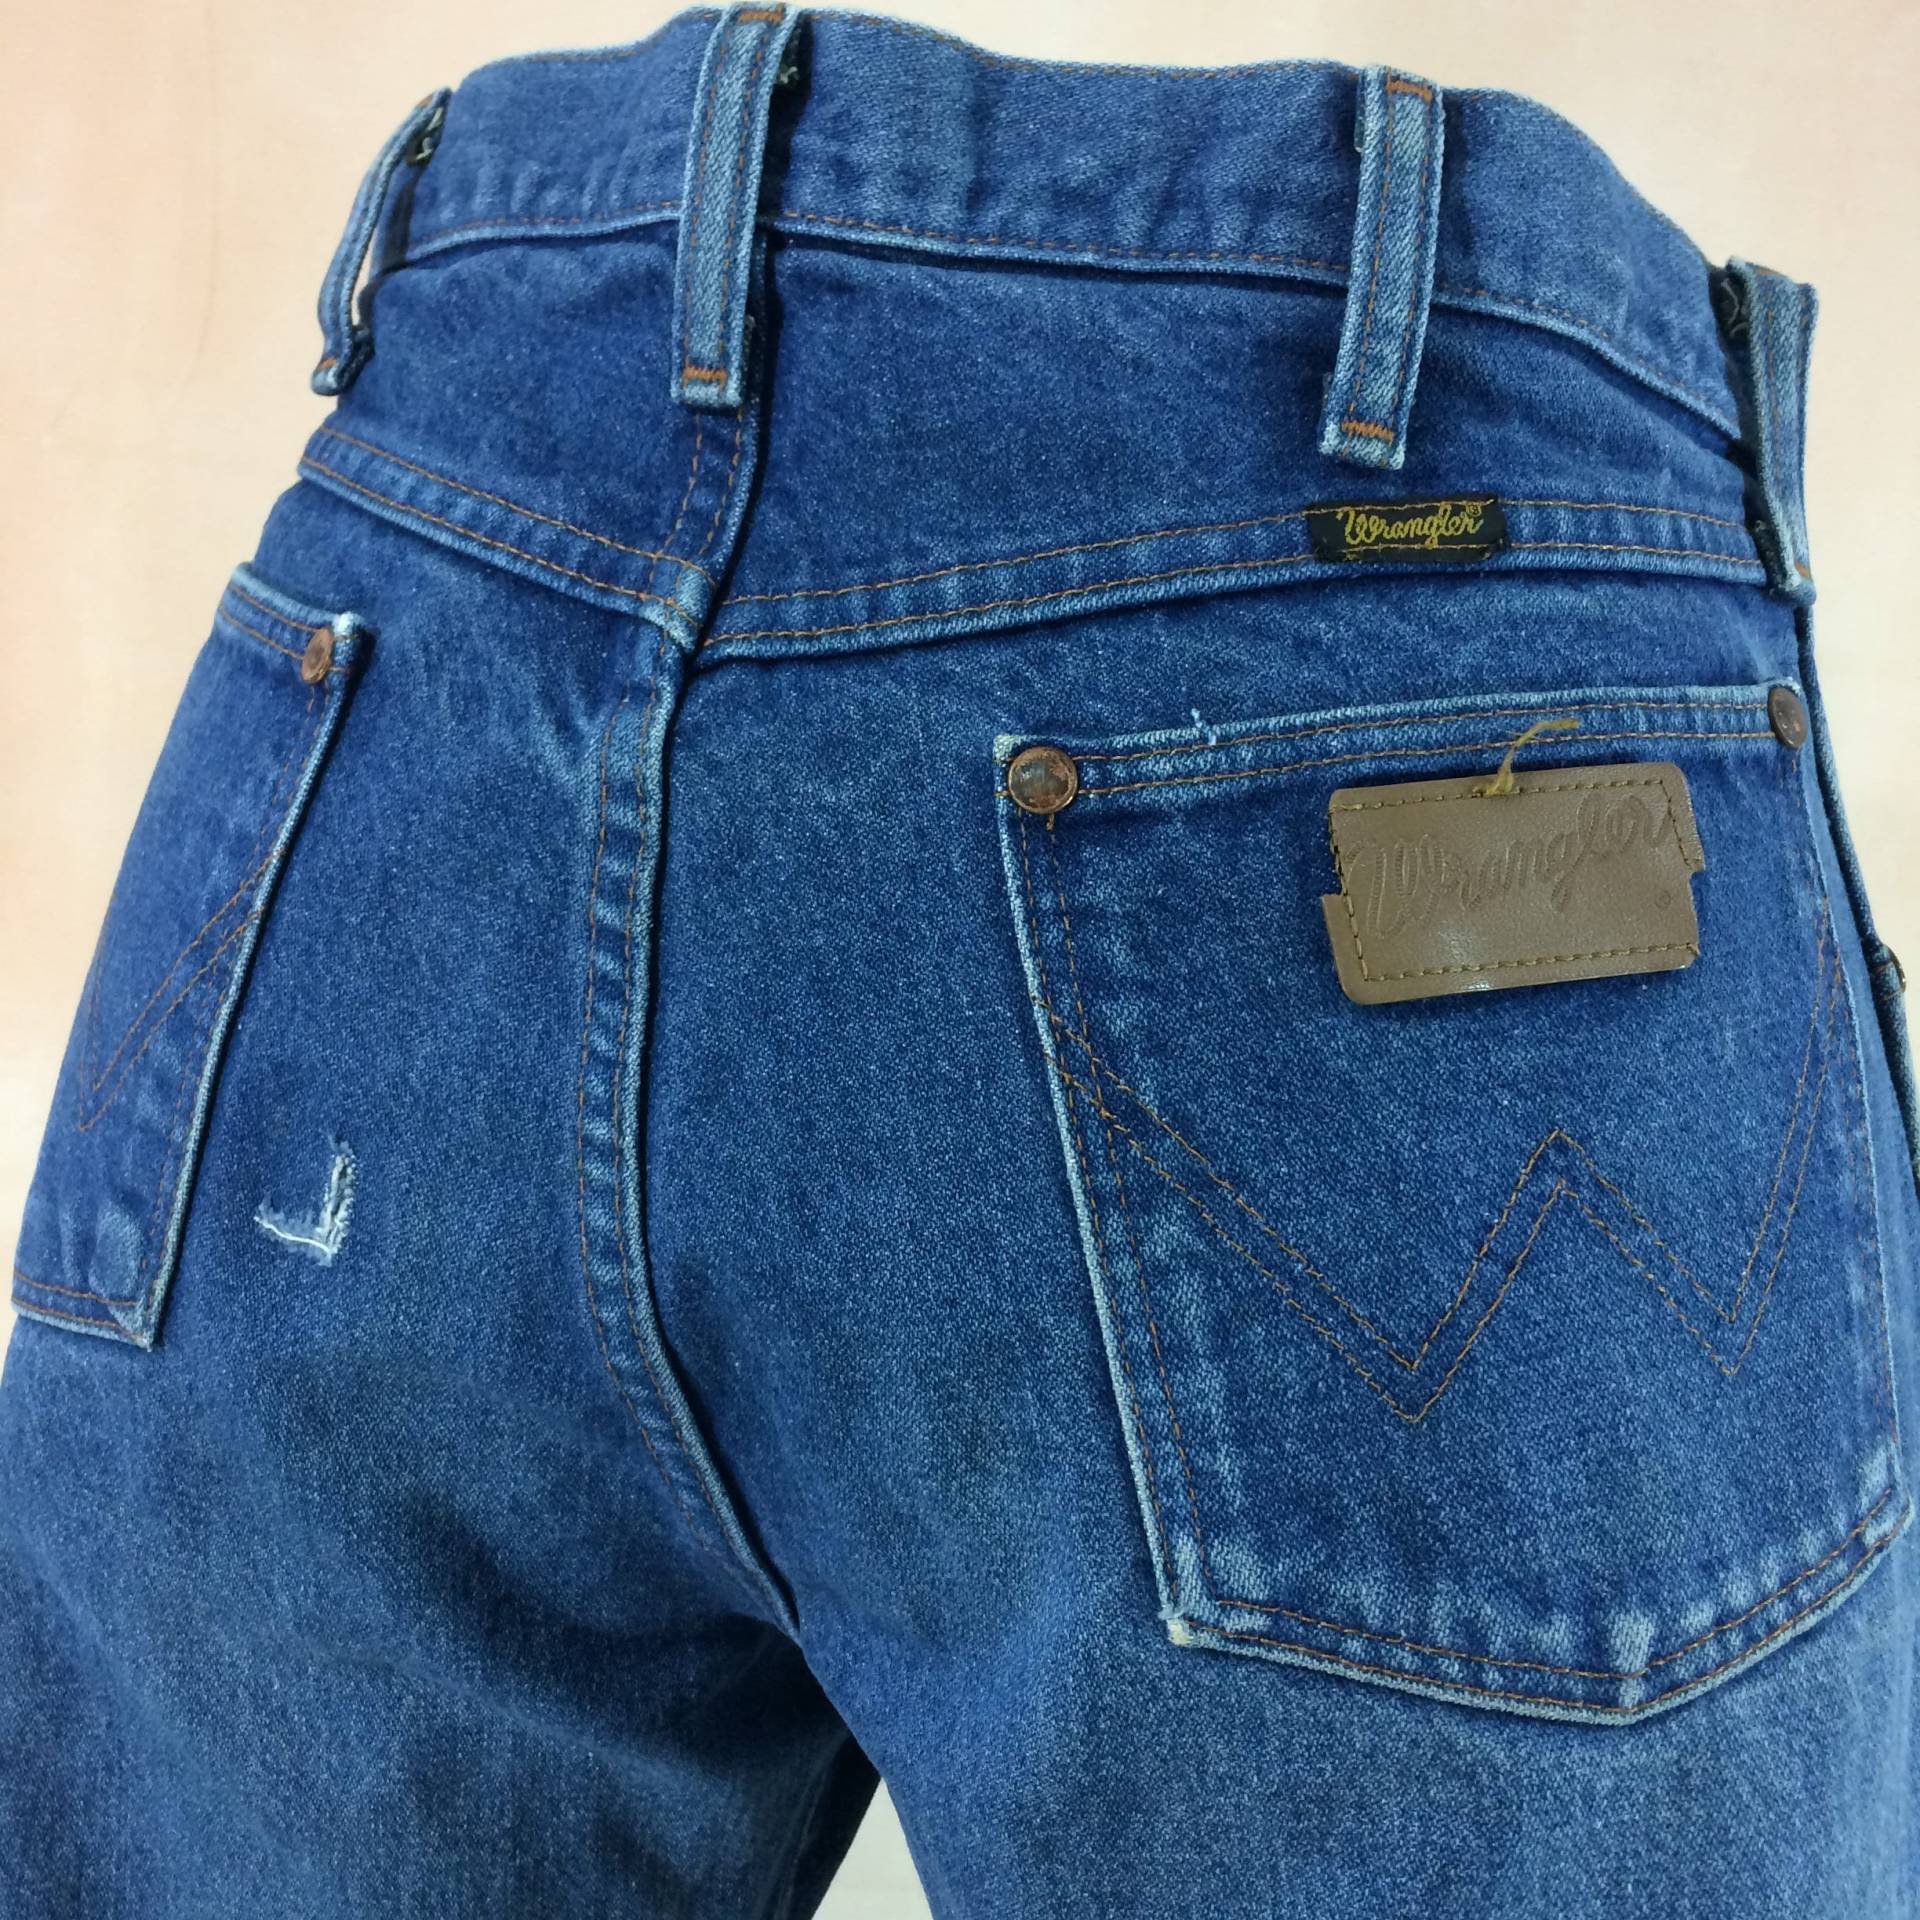 Größe 32 Wrangler Vintage Western Jeans W32 L31 Hohe Taille Distressed Boyfriends Mom Rodeo Riders Made in Usa " von AberyApparelClothing